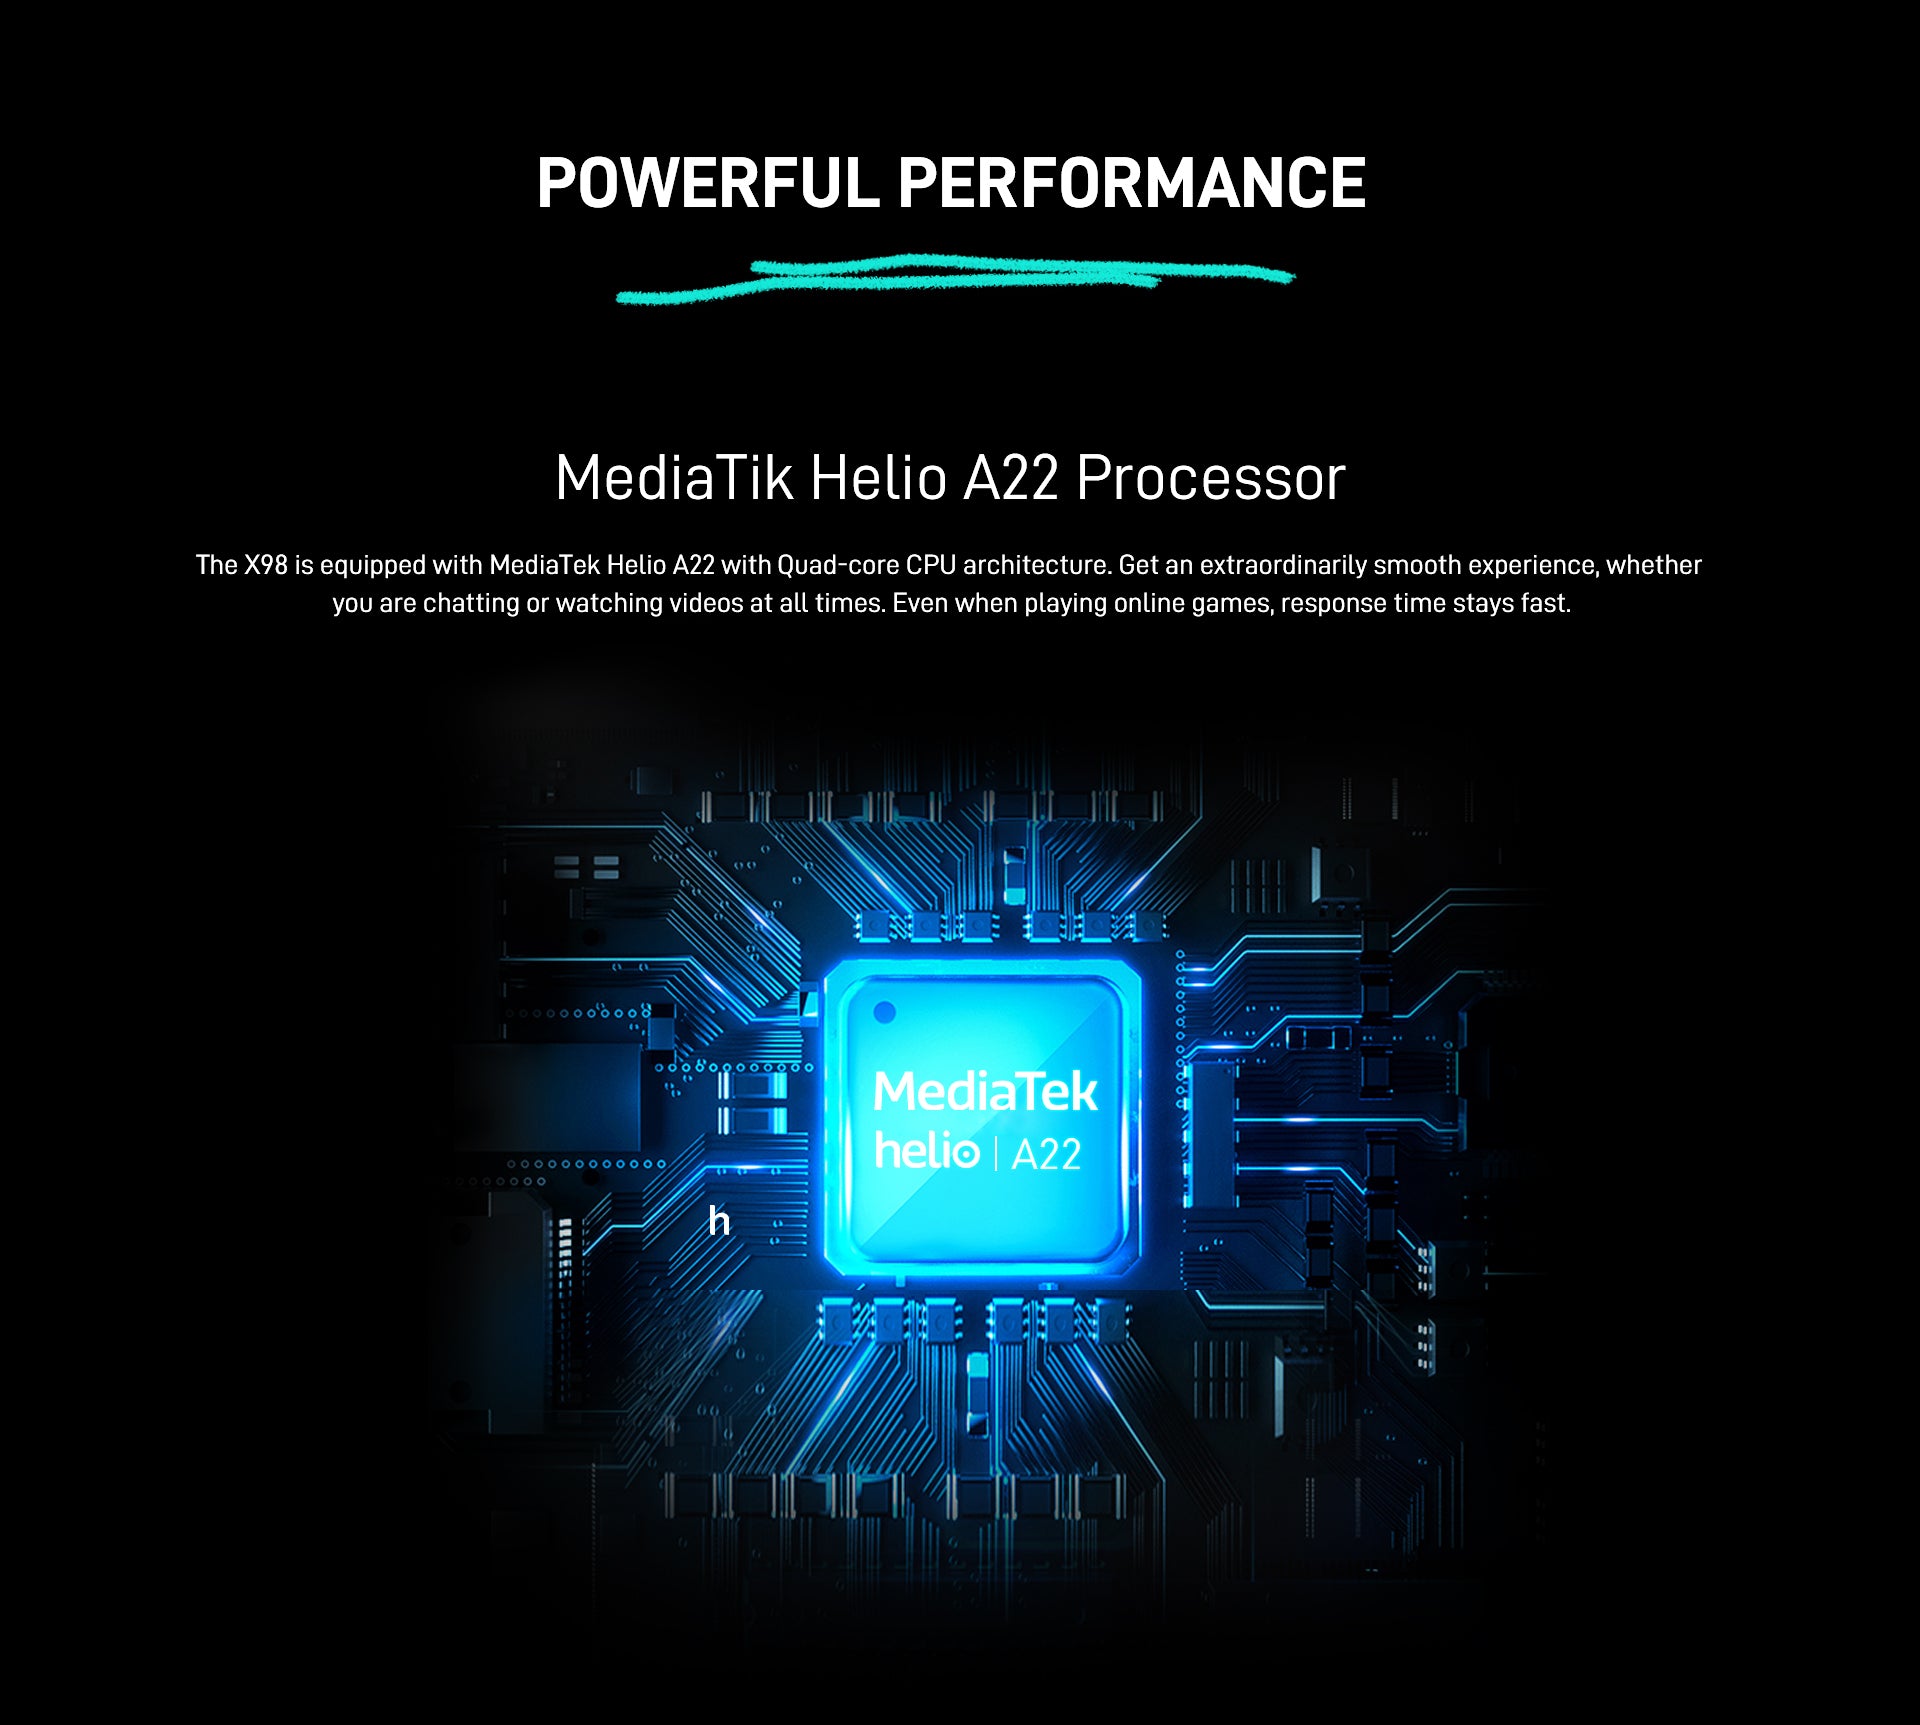 Powerful Performance MediaTik Helio A22 Processor The X98 is equipped with MediaTek Helio A22 with 	Quad-core CPU architecture. Get an extraordinarily smooth experience, whether you are chatting or watching videos at all times. Even when playing online games, response time stays fast.